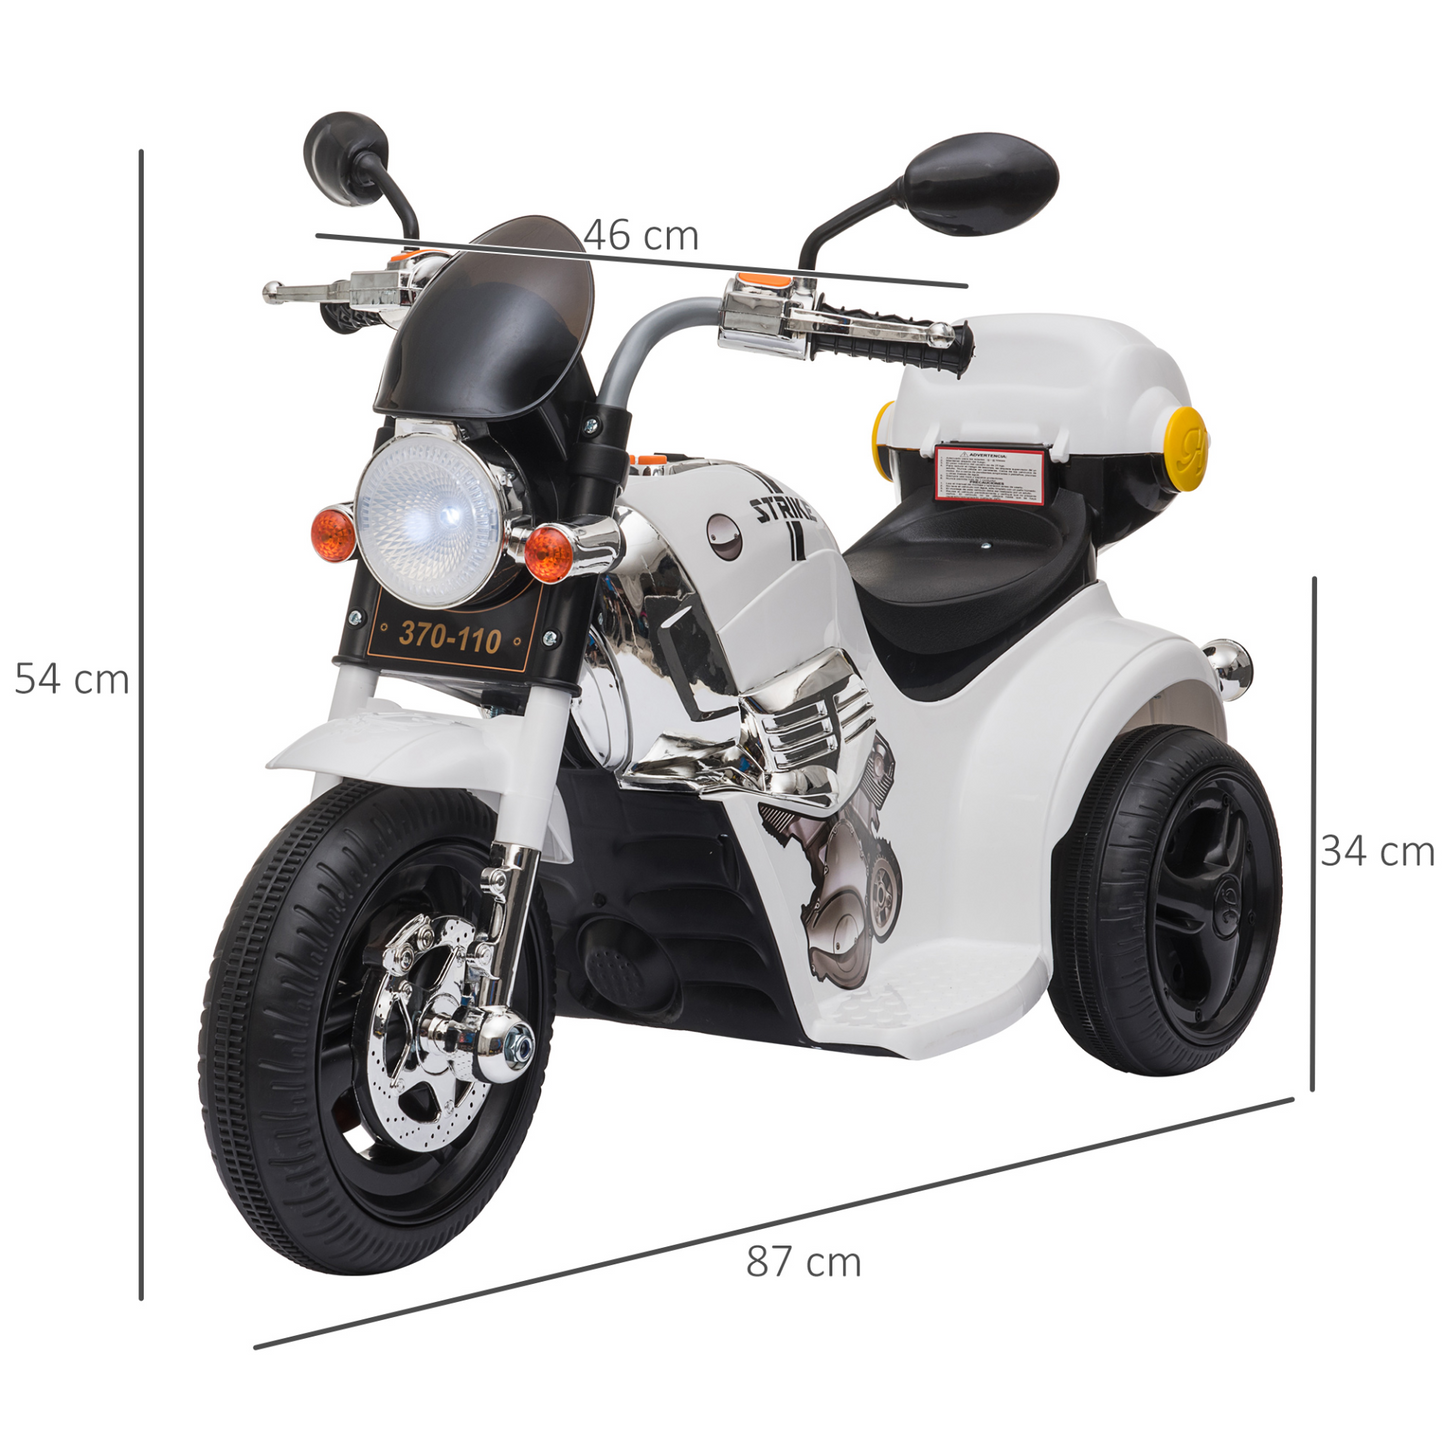 HOMCOM Kids 6V Electric Ride On Motorcycle Vehicle w/ Lights Music Horn Storage Box 3 Wheel Outdoor Play Toy for 18 - 36 Months White